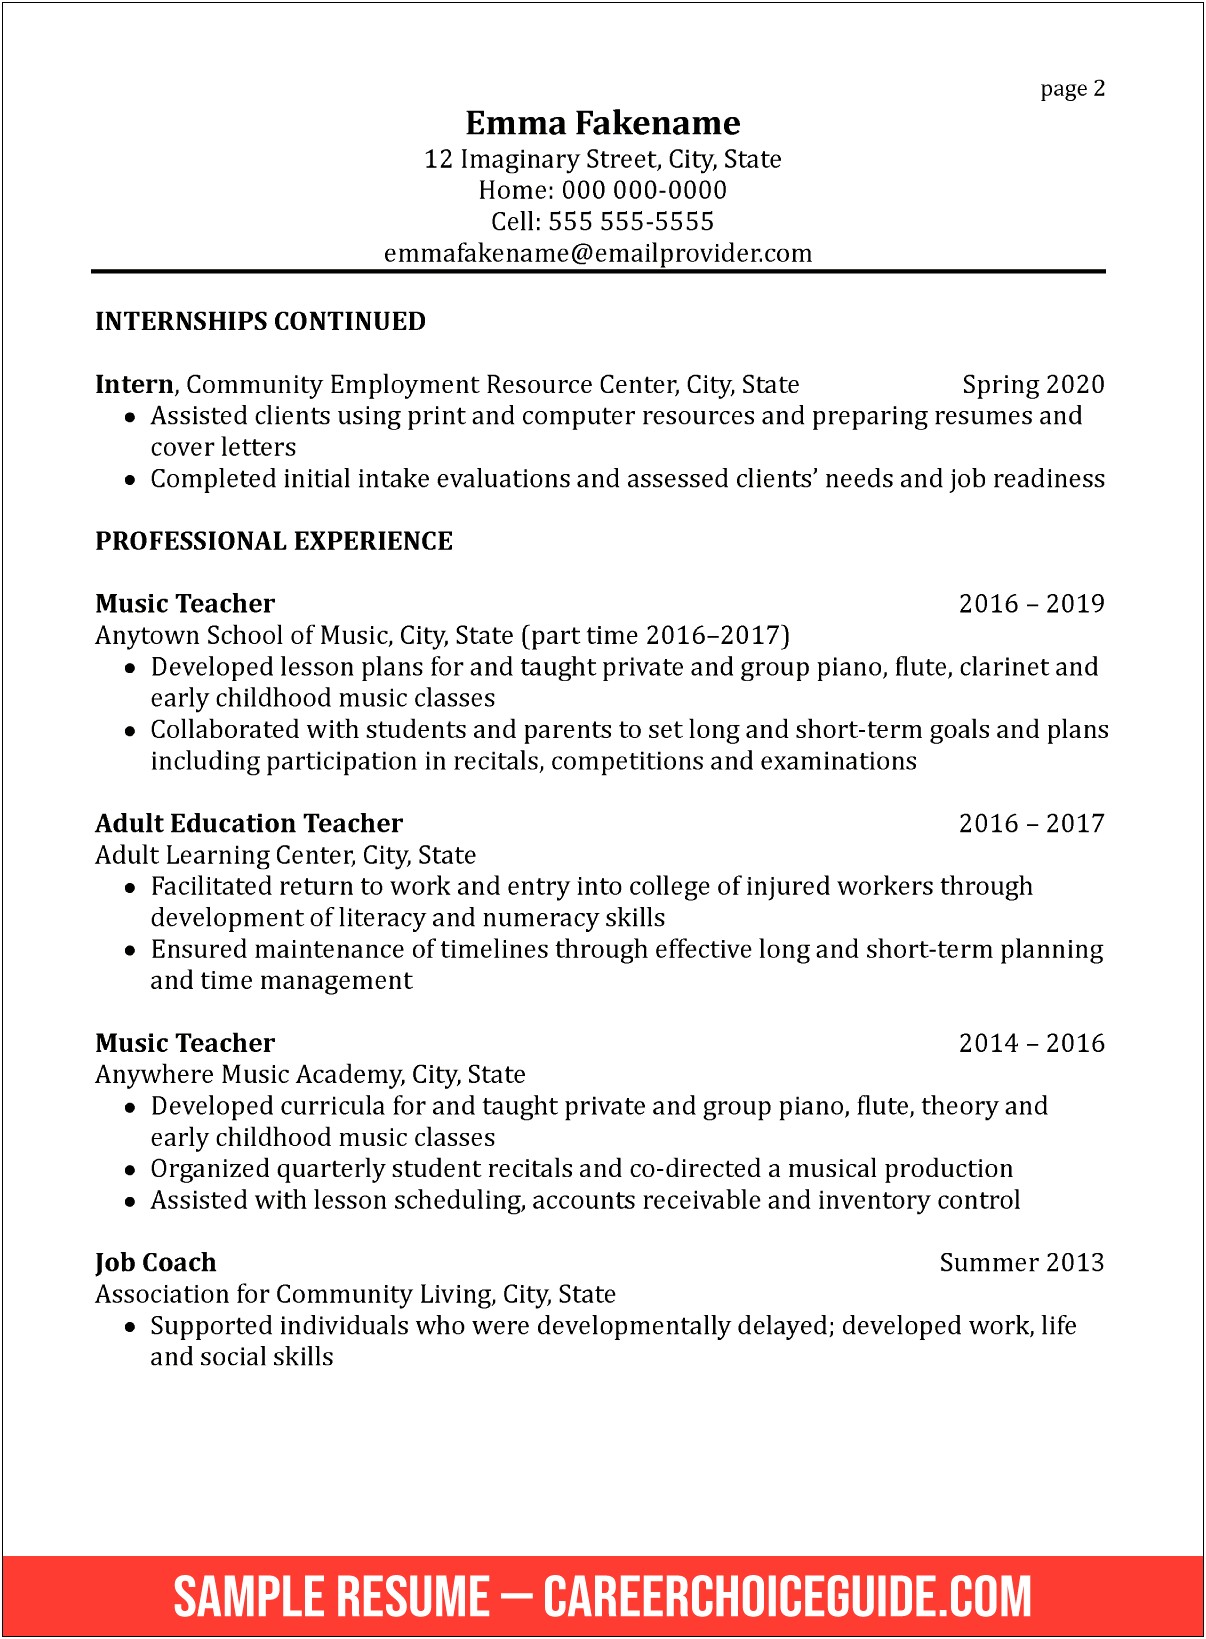 Resume Examples With Education Listed